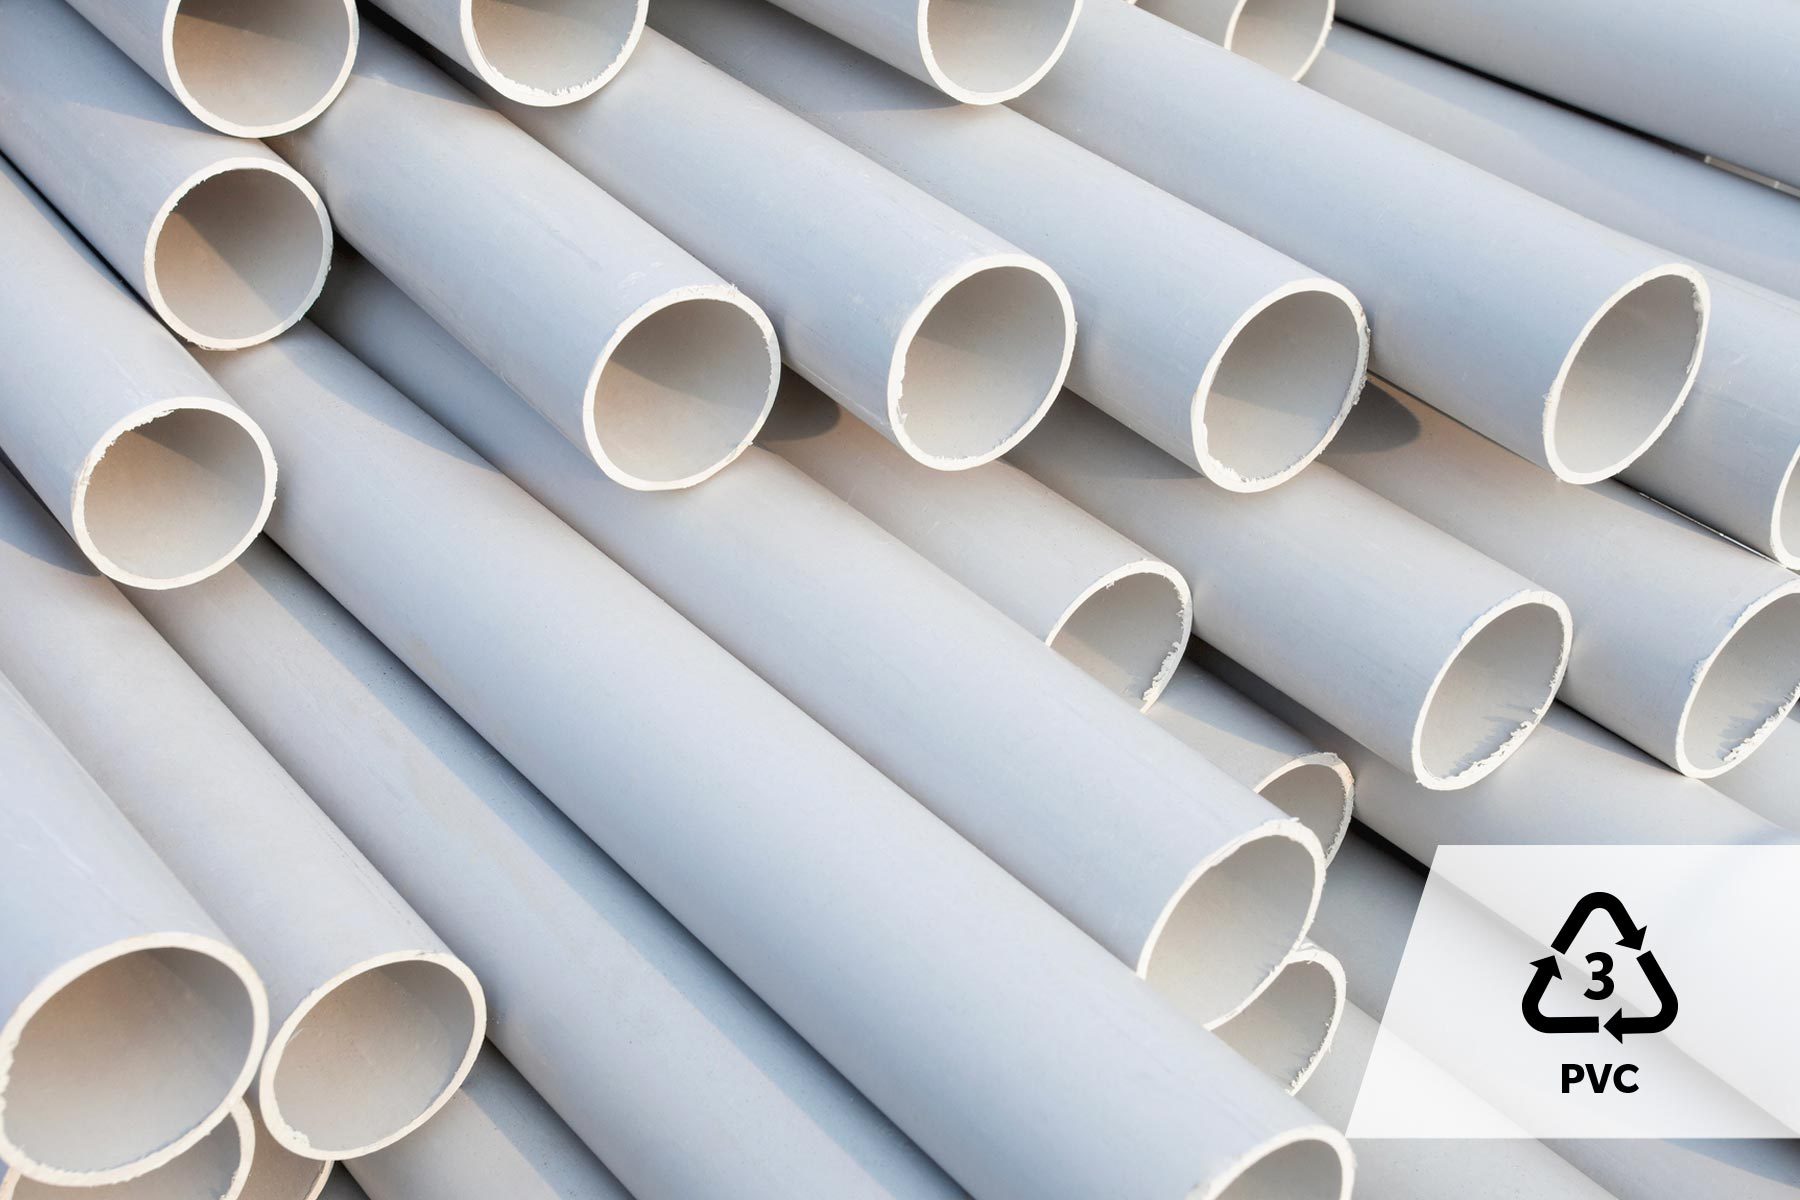 ABS vs. PVC: Which Pipes Are Better?